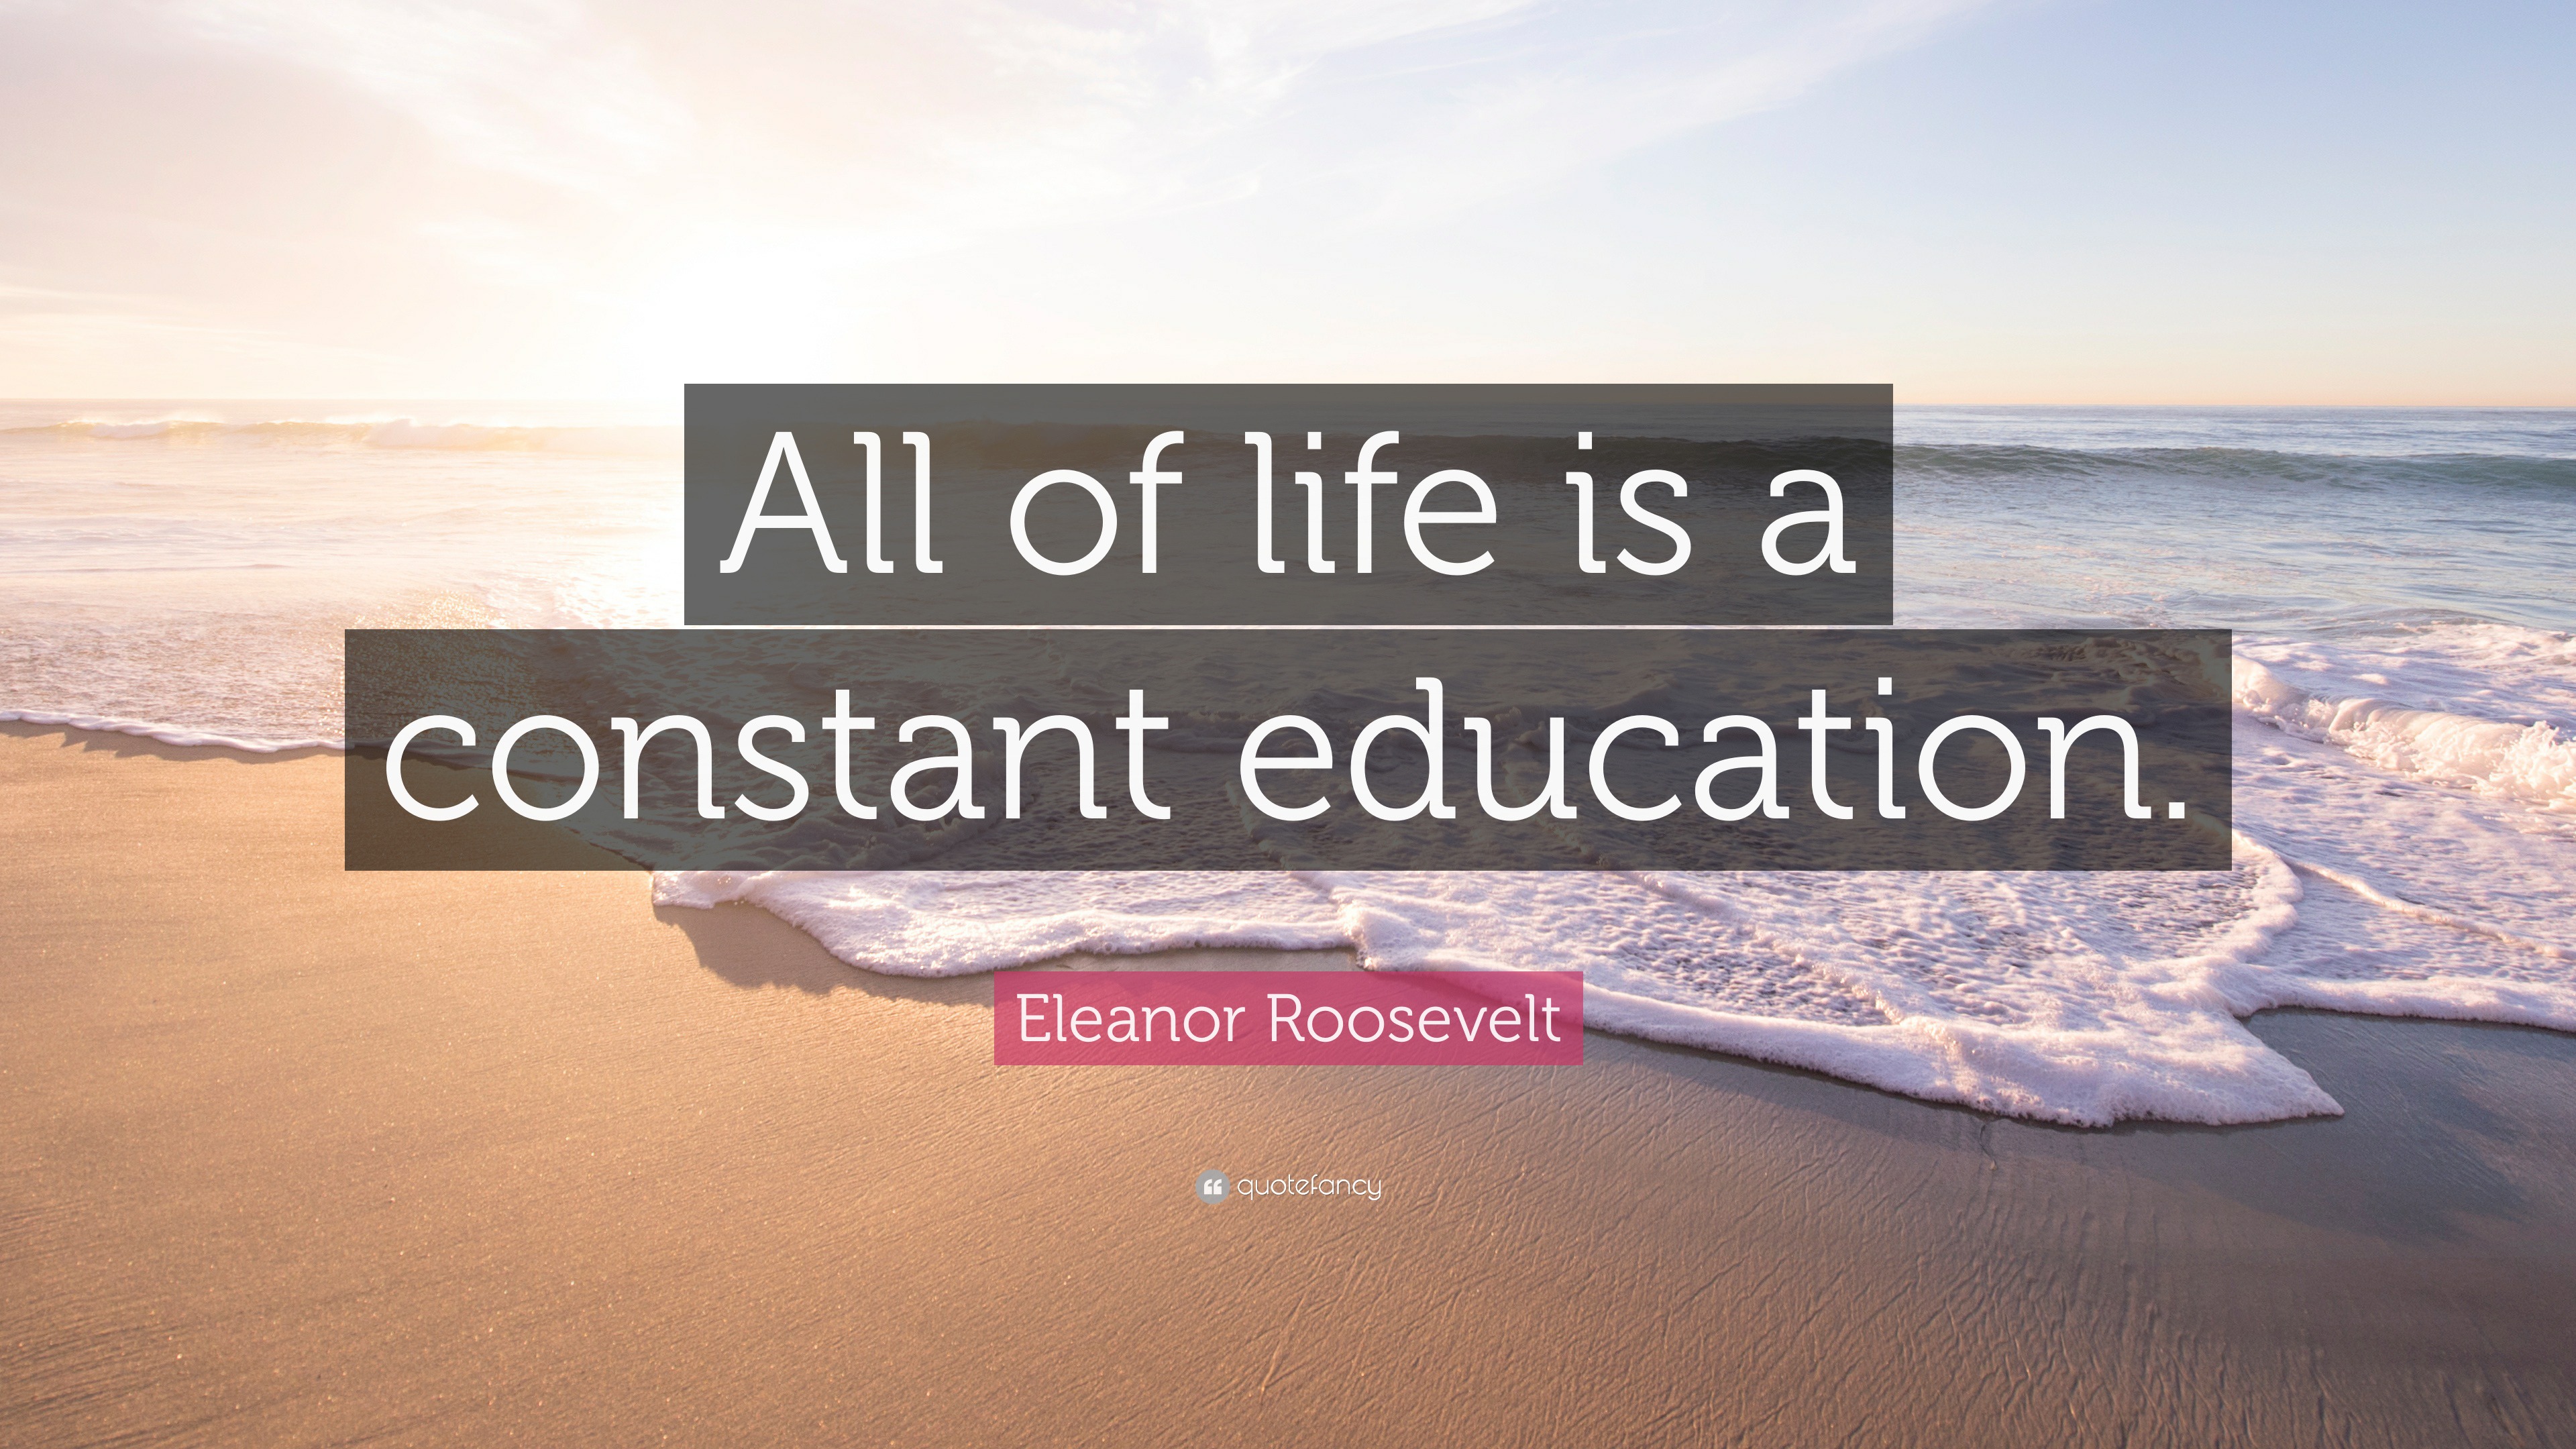 Eleanor Roosevelt Quote: “All of life is a constant education.”